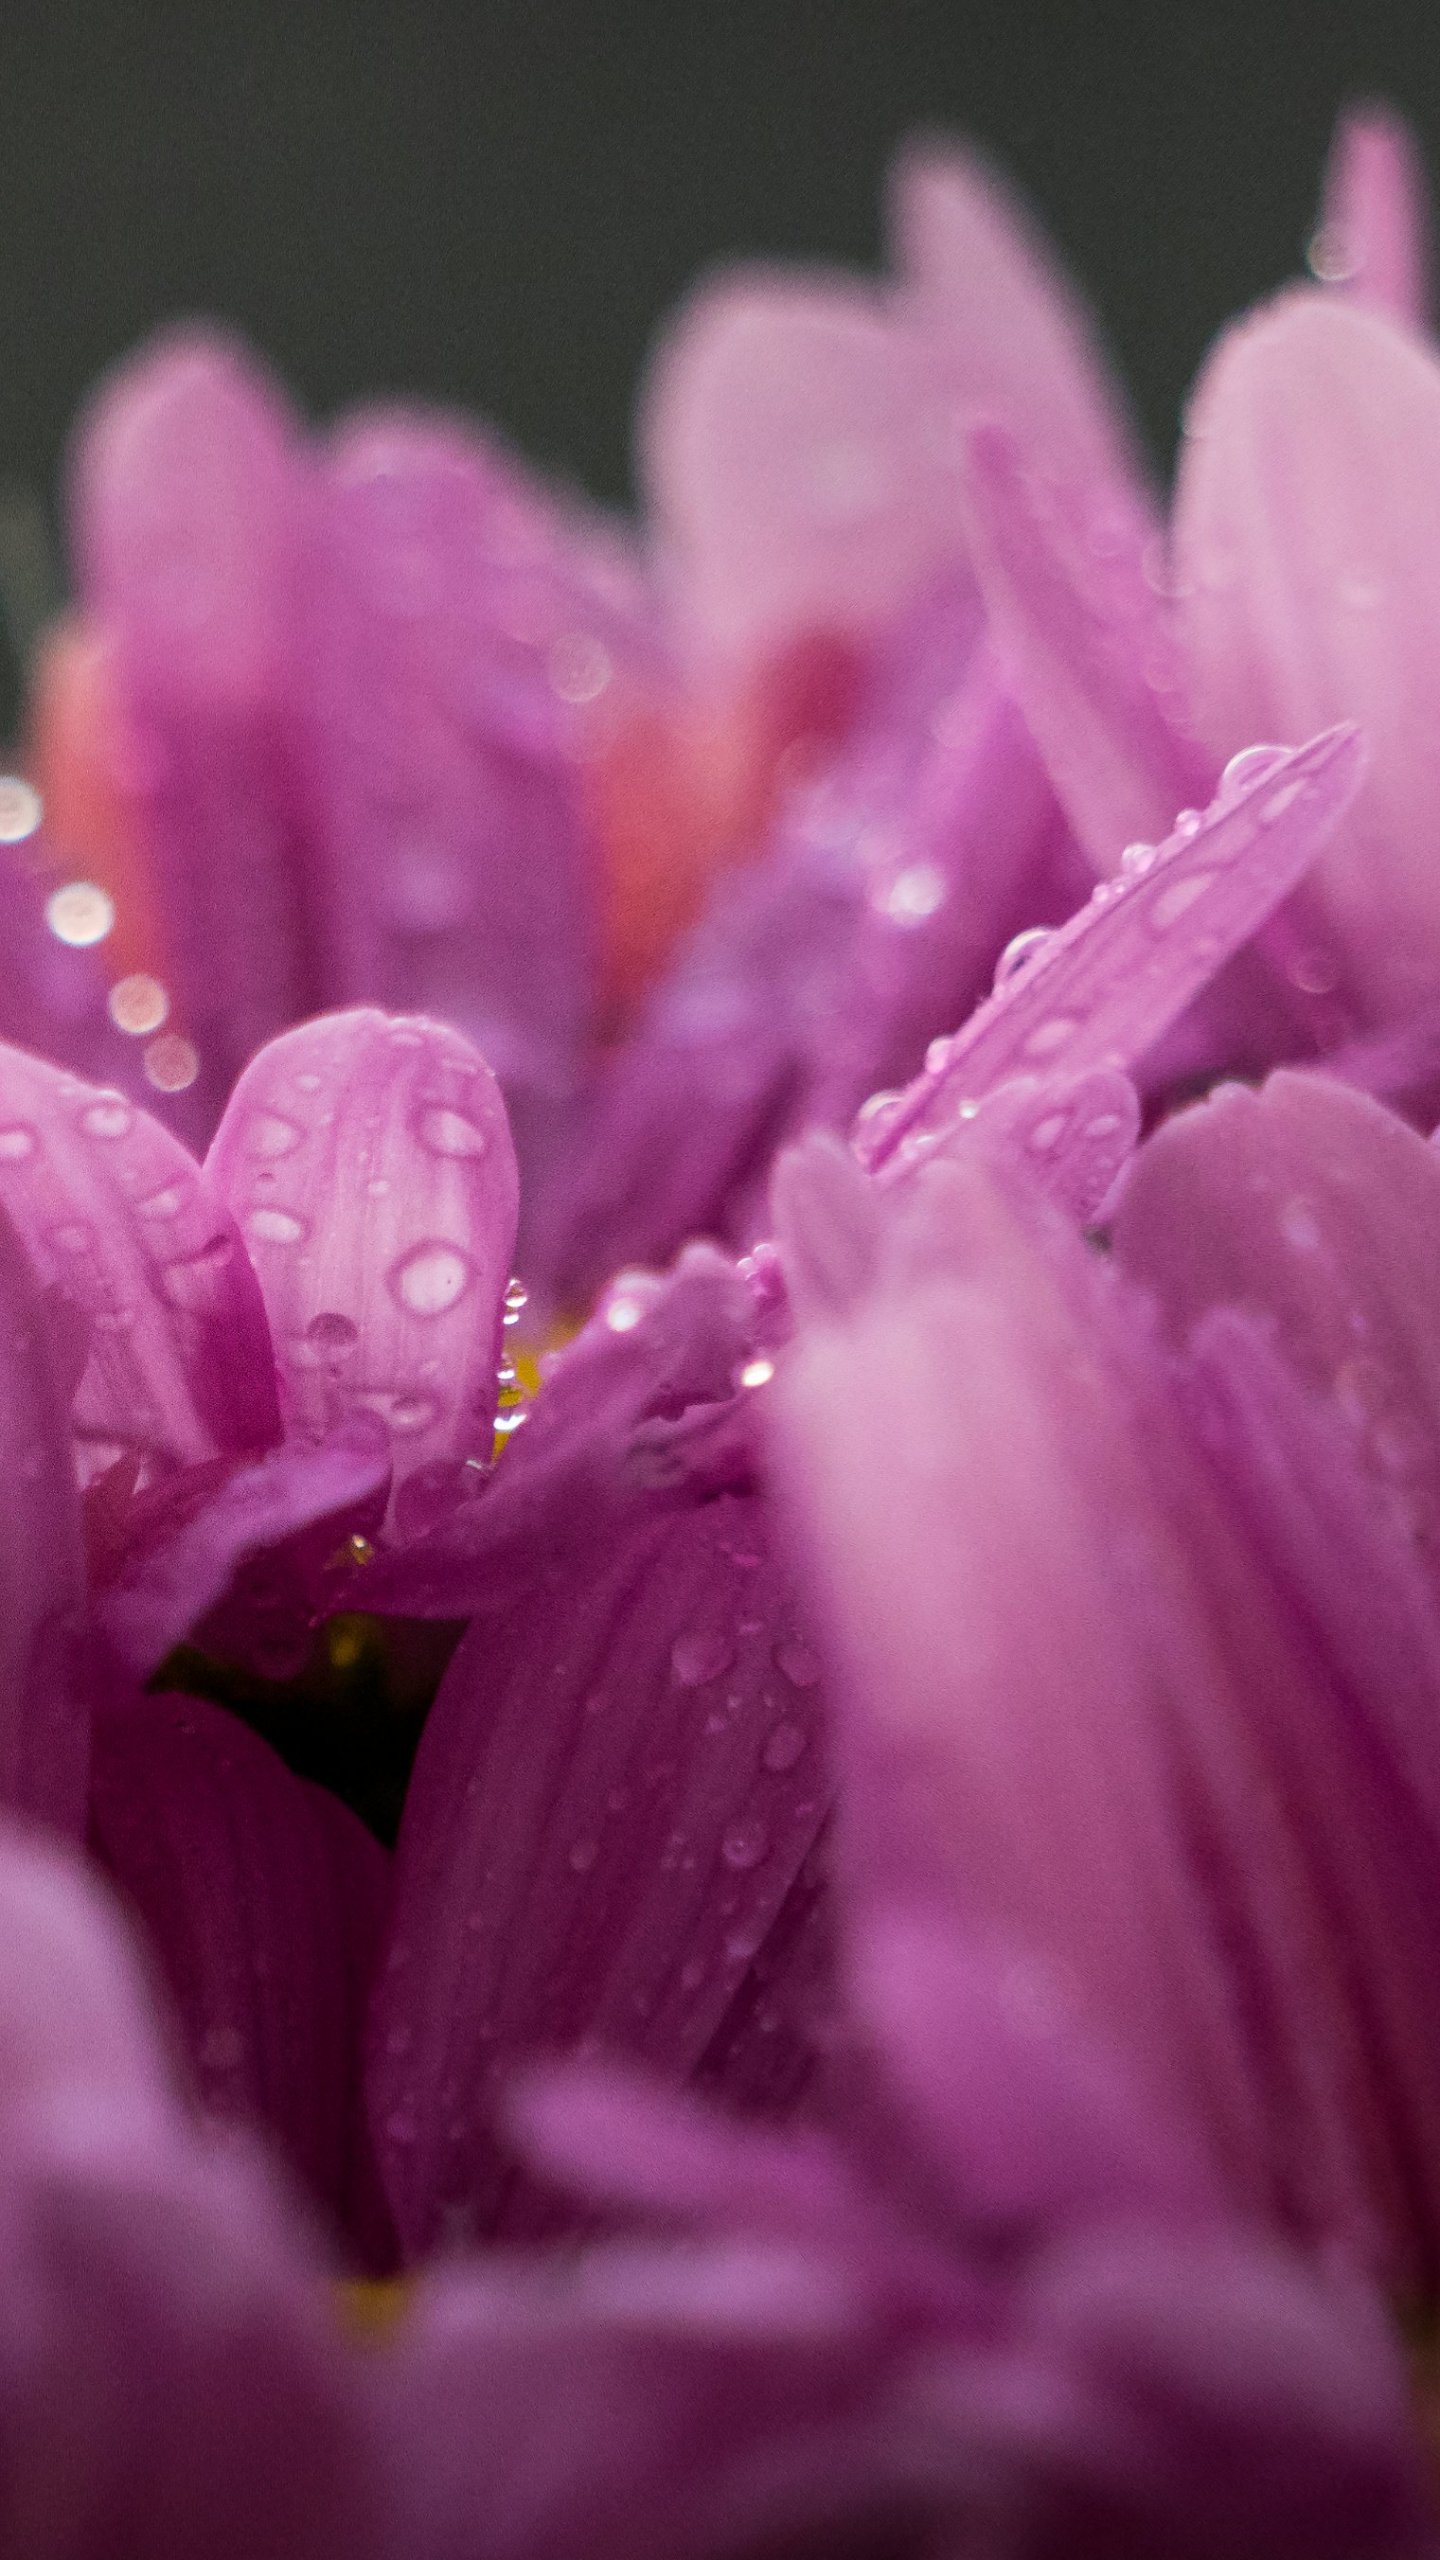 Pink Flowers Wallpaper Iphone Android Amp Desktop Backgrounds - Flowers With Rain Drops - HD Wallpaper 